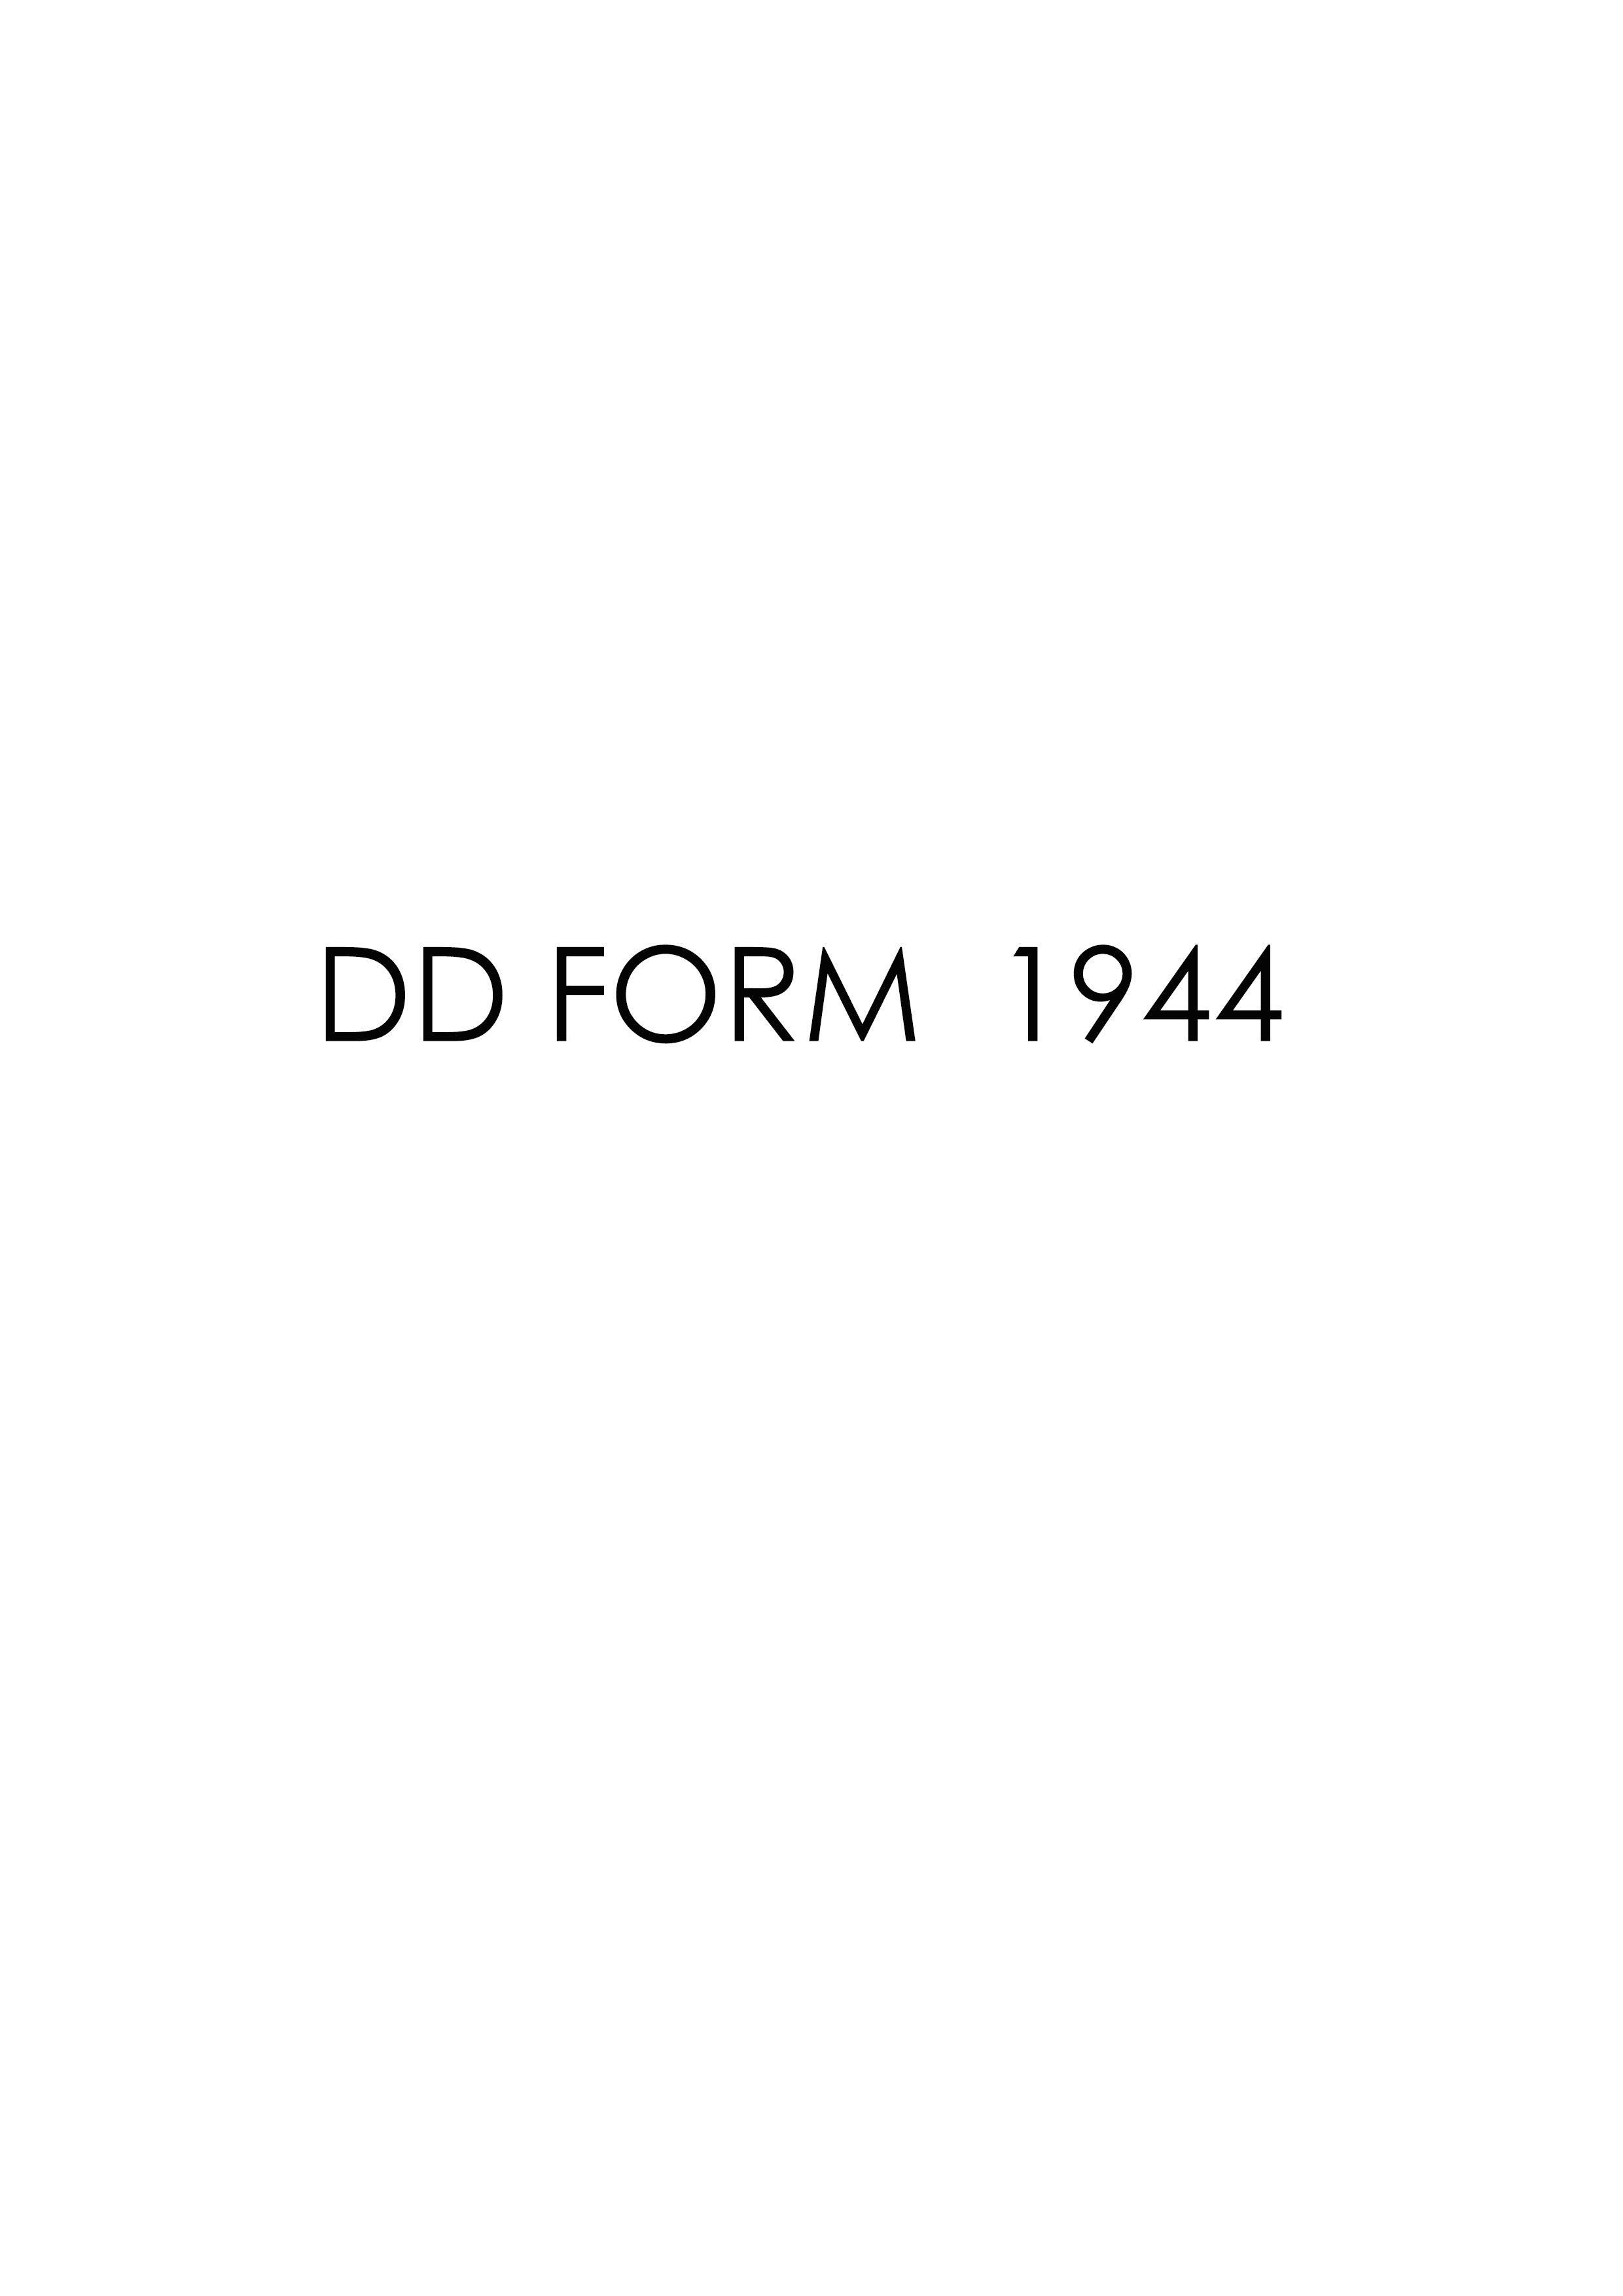 Download Fillable dd Form 1944